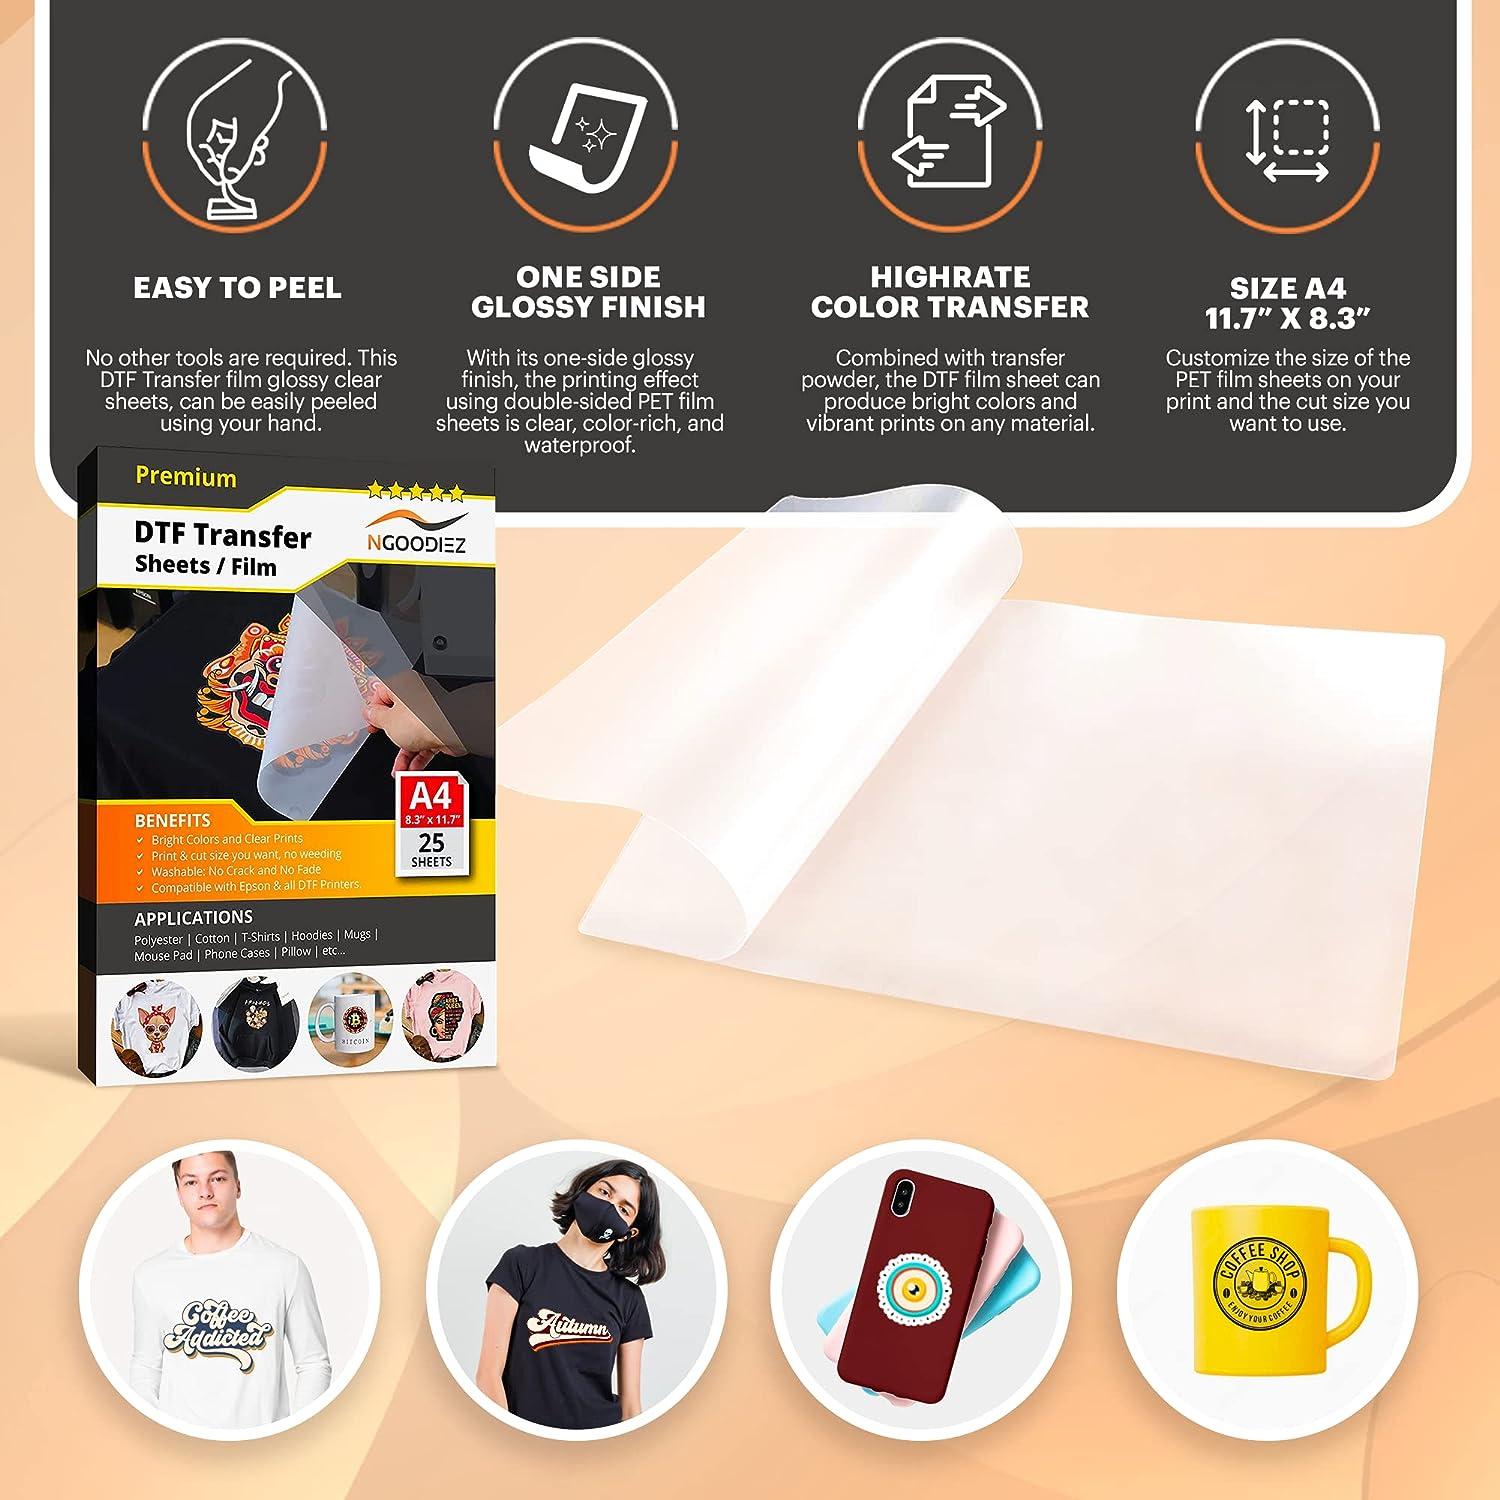 NGOODIEZ DTF Transfer Film Double-Sided Matte Clear DTF Transfer Paper  PreTreat Sheets PET Heat Transfer Paper Suited for All Modified Desktop DTF  Printers - A4 (8.3 x 11.7) 25 DTF Film Sheets 25 Sheets Matte